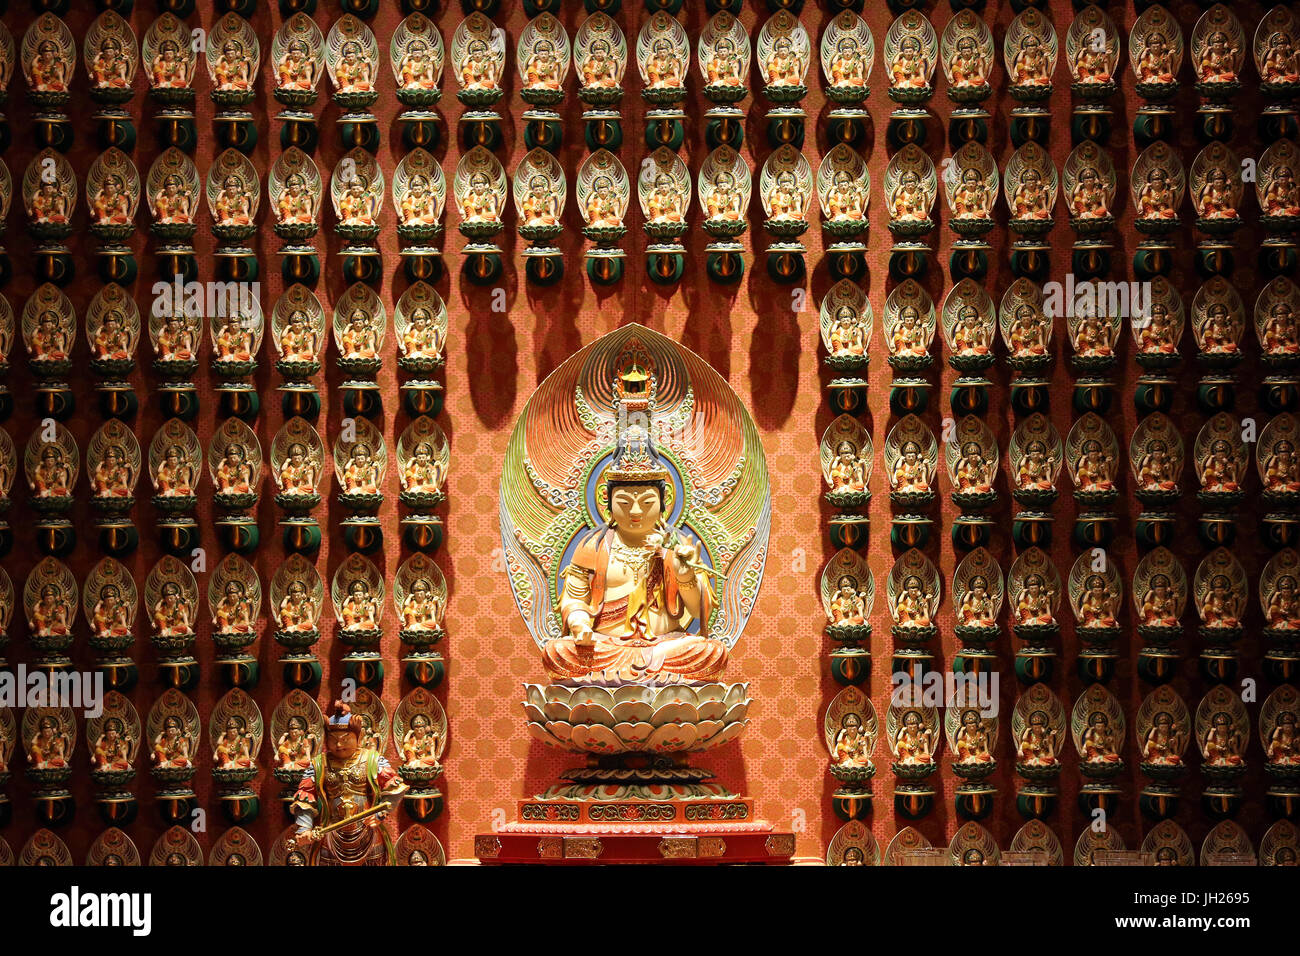 Buddha Tooth Relic Temple in Chinatown. Mahasthamaprapta Bodhisattva. Guardian deity for persons born in the year of the horse. Singapore. Stock Photo